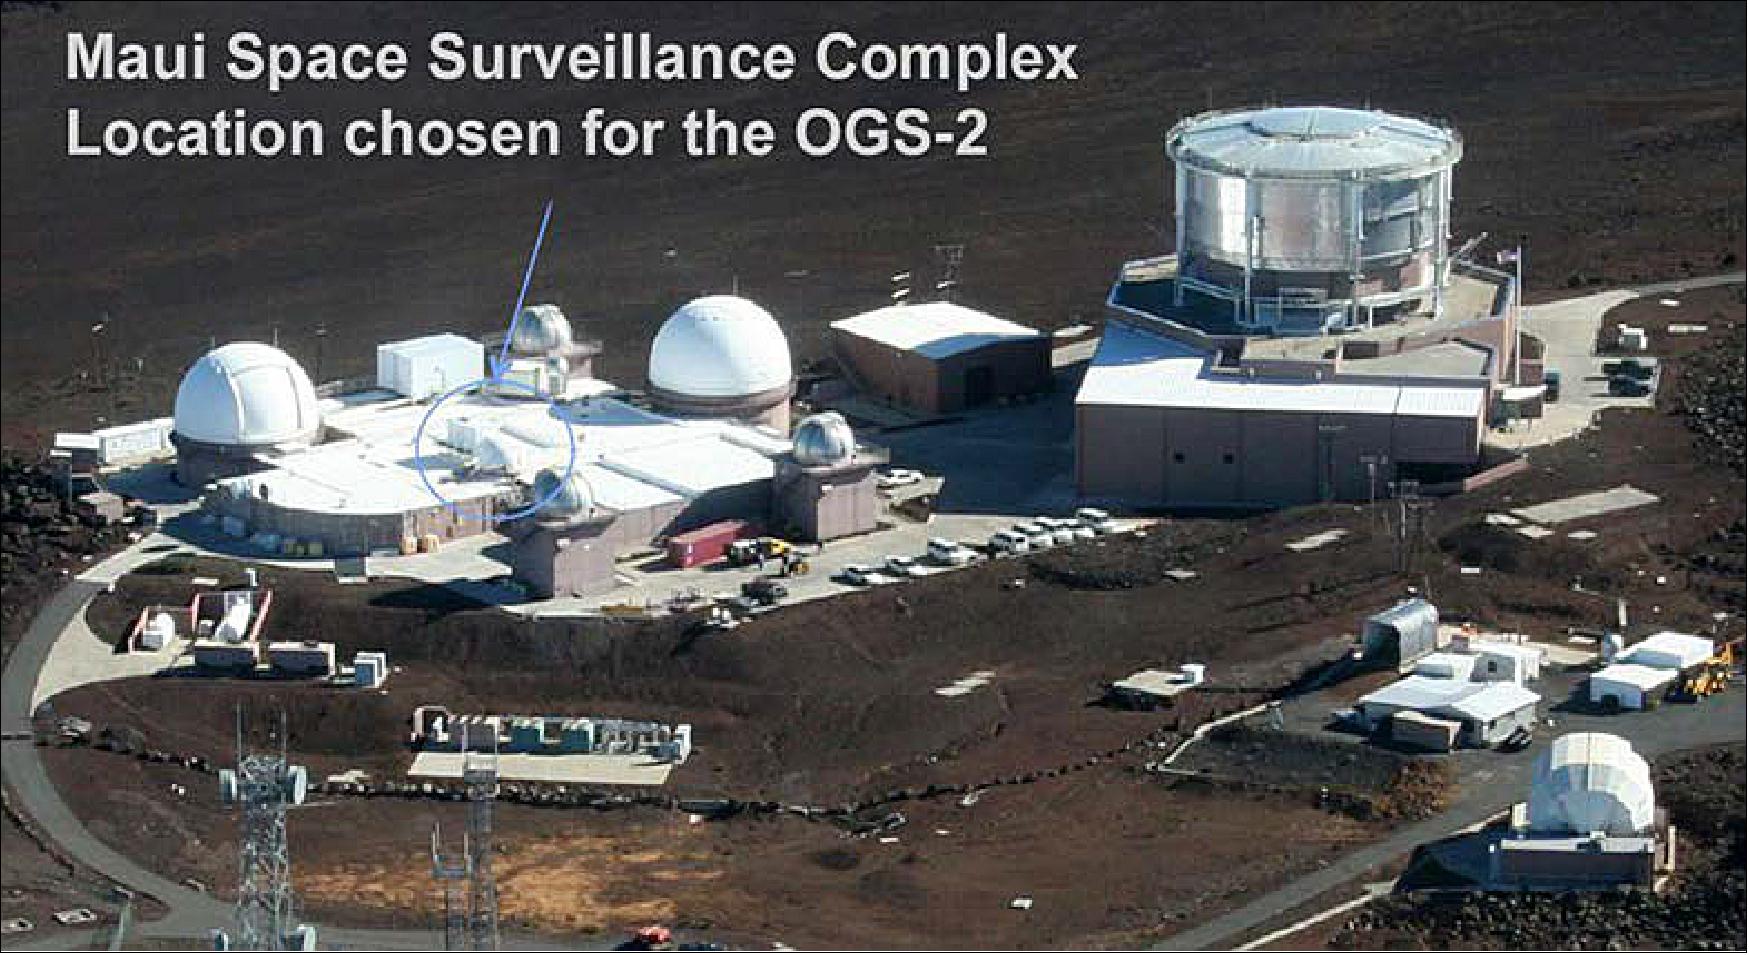 Figure 24: OGS-2 (Optical Ground Station 2) location at the Maui Optical and Supercomputing Space Surveillance Complex (image credit: NASA)